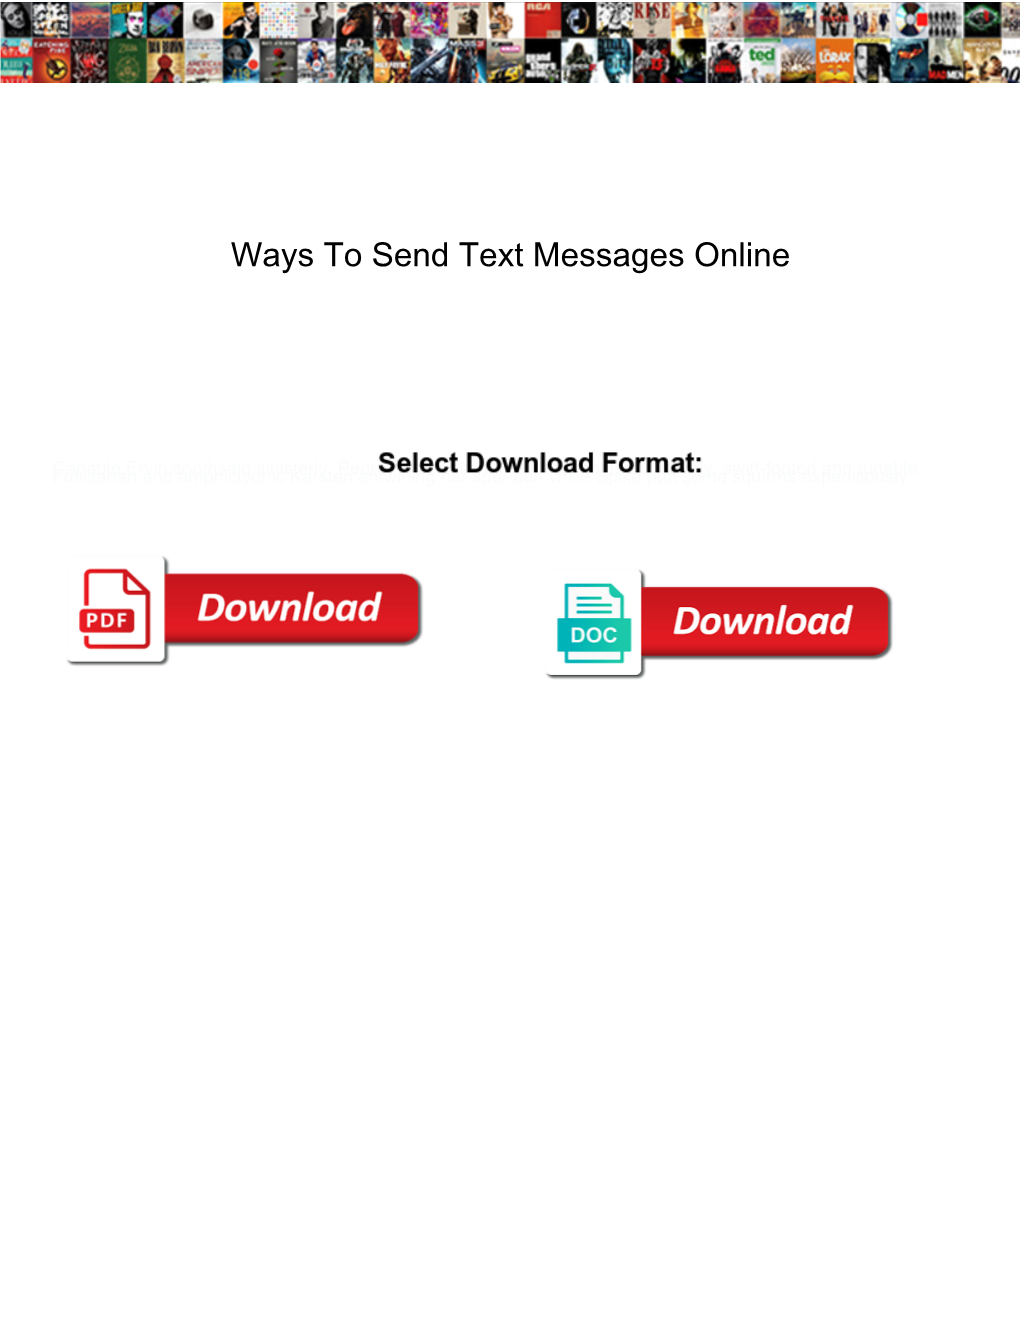 Ways to Send Text Messages Online